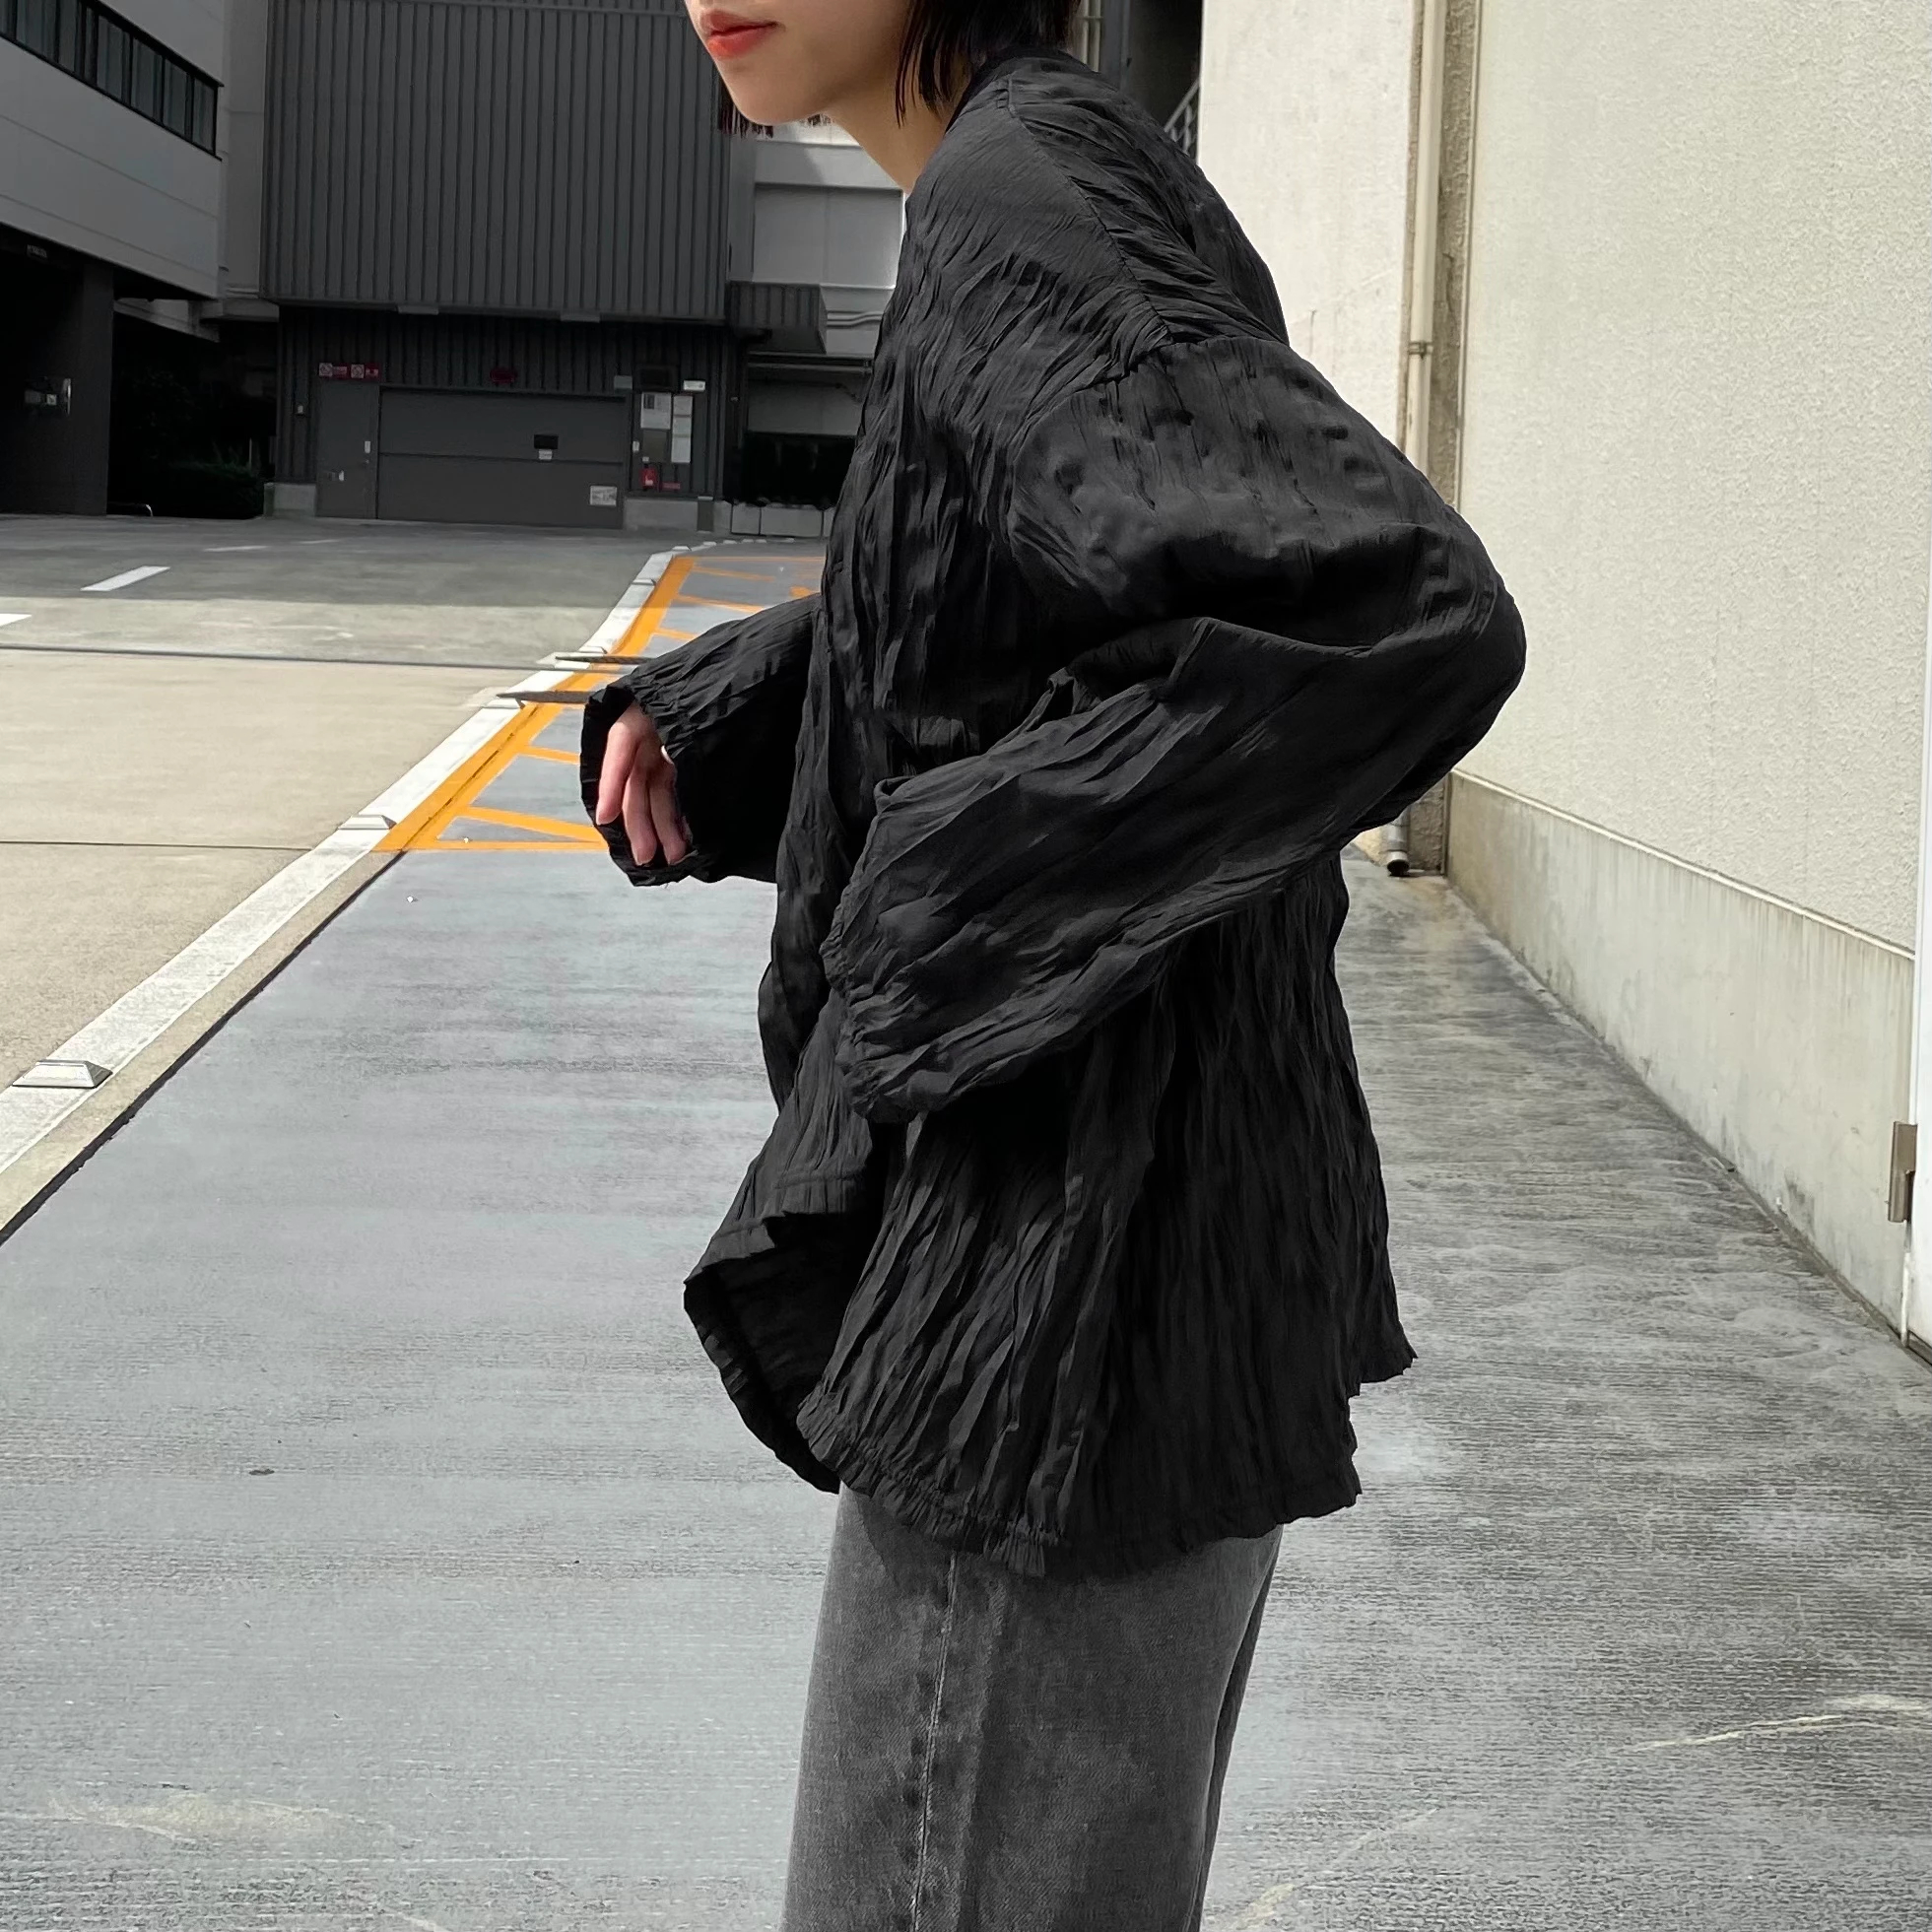 new wrinkle side cut long T blouse / willfully（ウィルフリー）の 